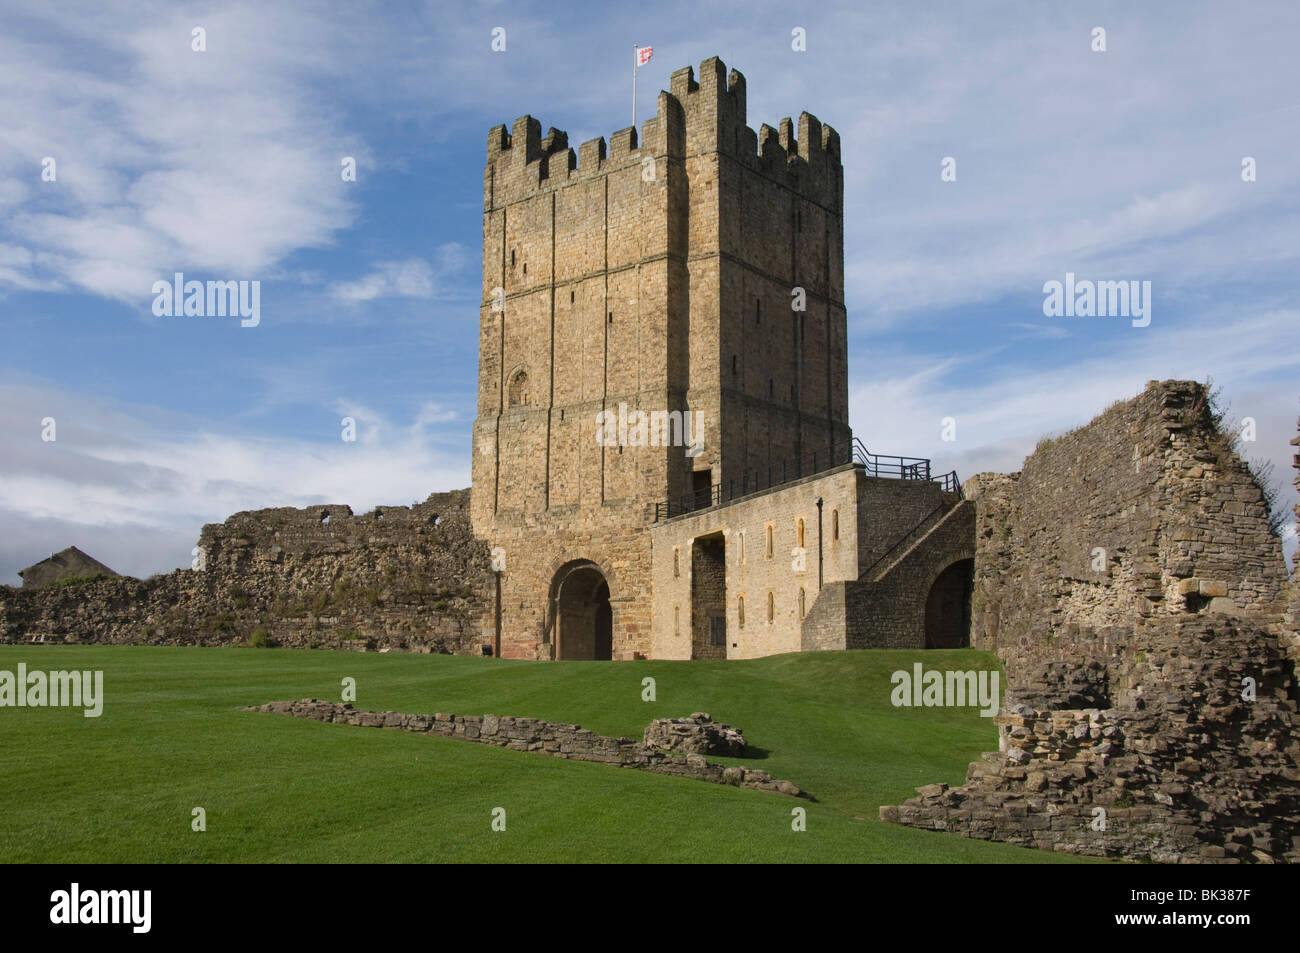 Richmond Castle dating from the 11th century, North Yorkshire, England, United Kingdom, Europe Stock Photo